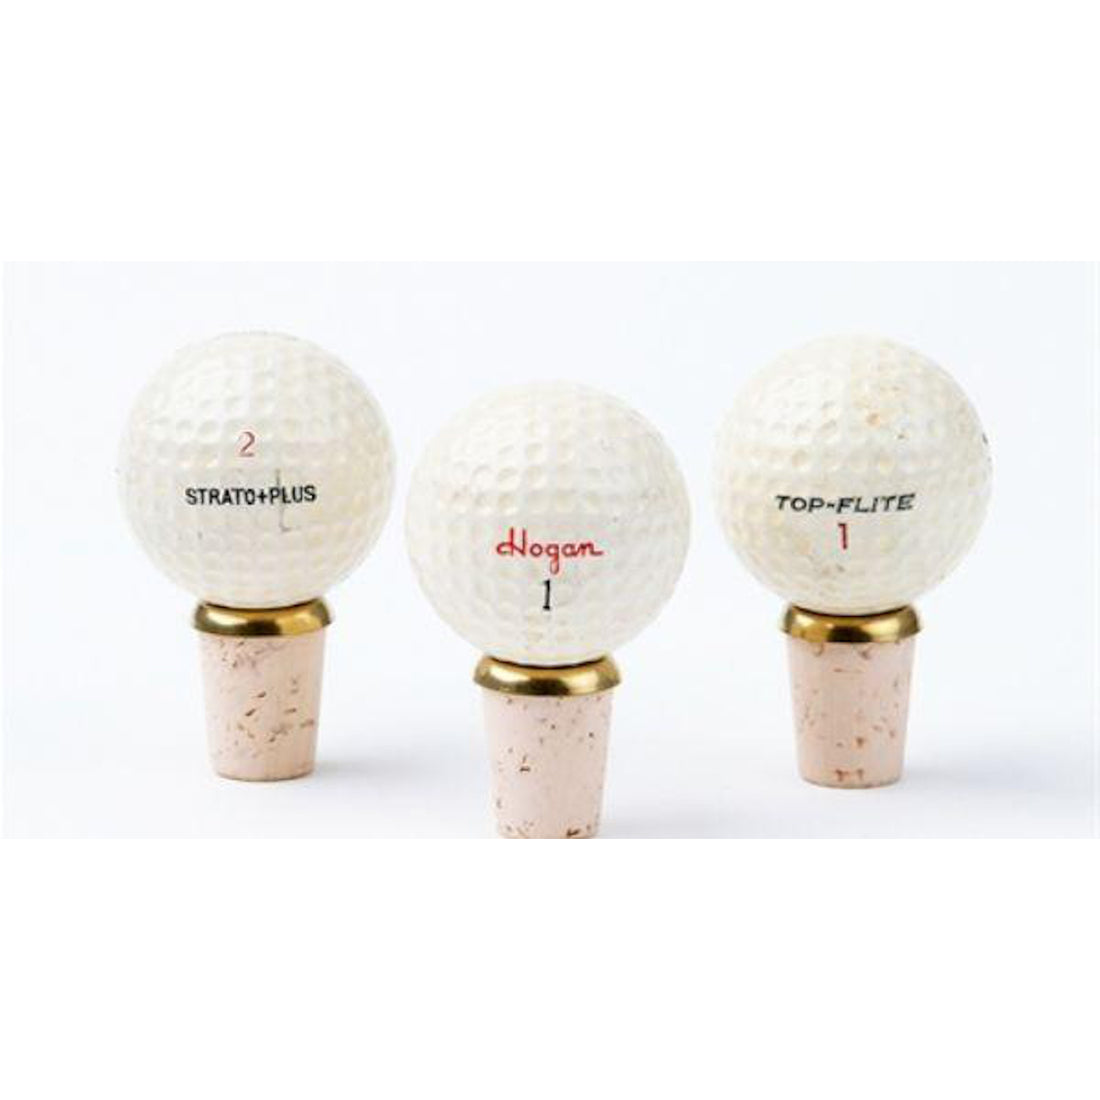 Three handcrafted Hester &amp; Cook Golf Ball Knobstoppers mounted on tees against a plain background.